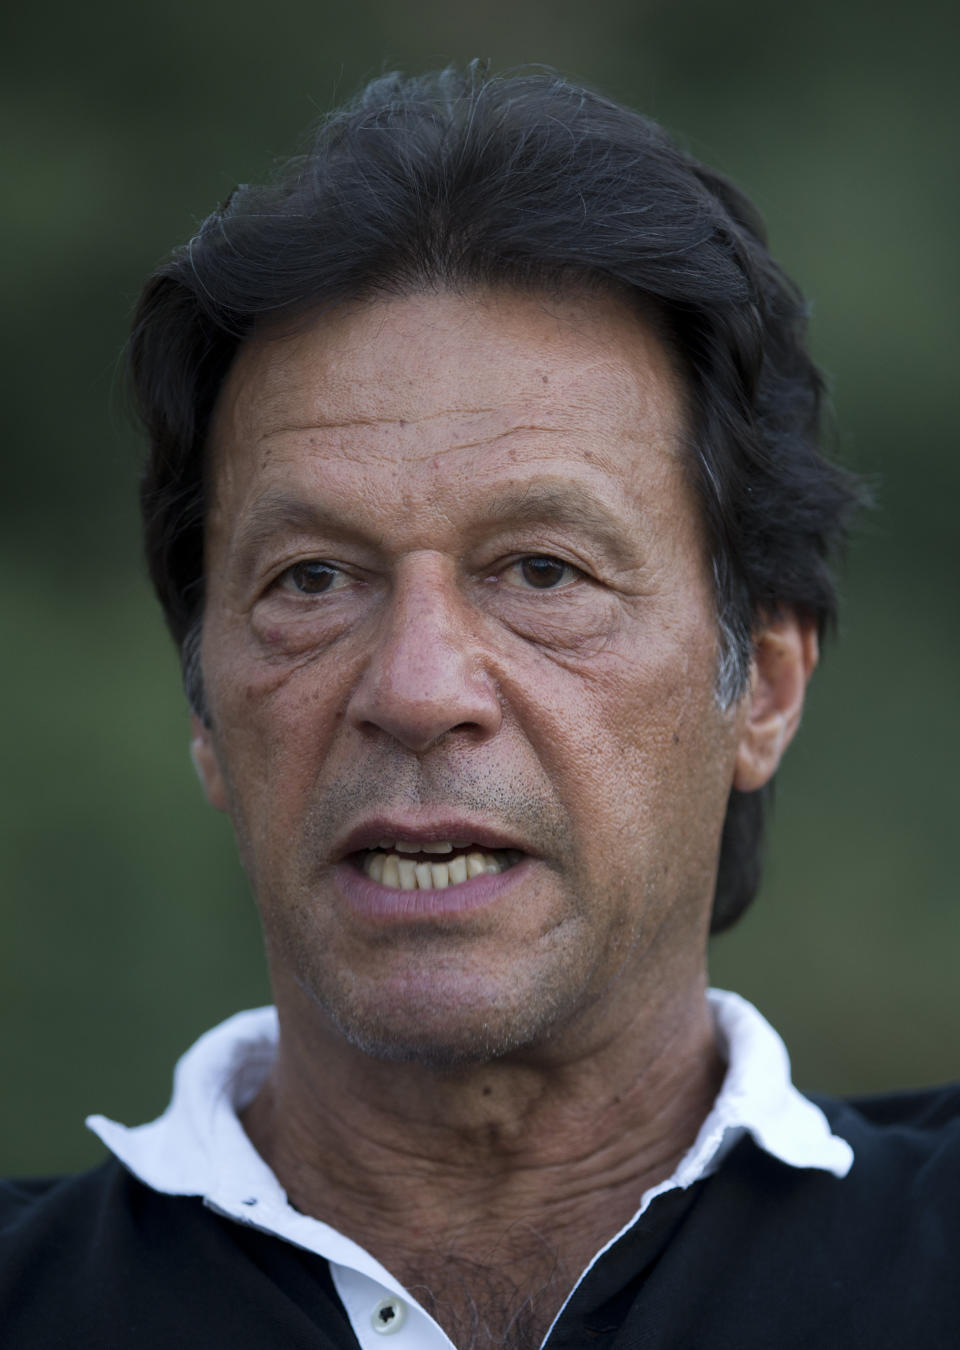 In this photo taken on Sept. 25, 2017 in Islamabad, Pakistan, Pakistan's cricketer-turned politician Imran Khan heads the center-right Pakistan Tehrik-e-Insaf party. Khan, who is tipped to win the polls, faces his stiffest competition from ex-premier Nawaz Sharif's Pakistan Muslim League party. Pakistan's parliamentary elections on July 25 will mark the second time a democratically elected government in this Islamic nation has been succeeded by another. (AP Photo/B.K. Bangash)